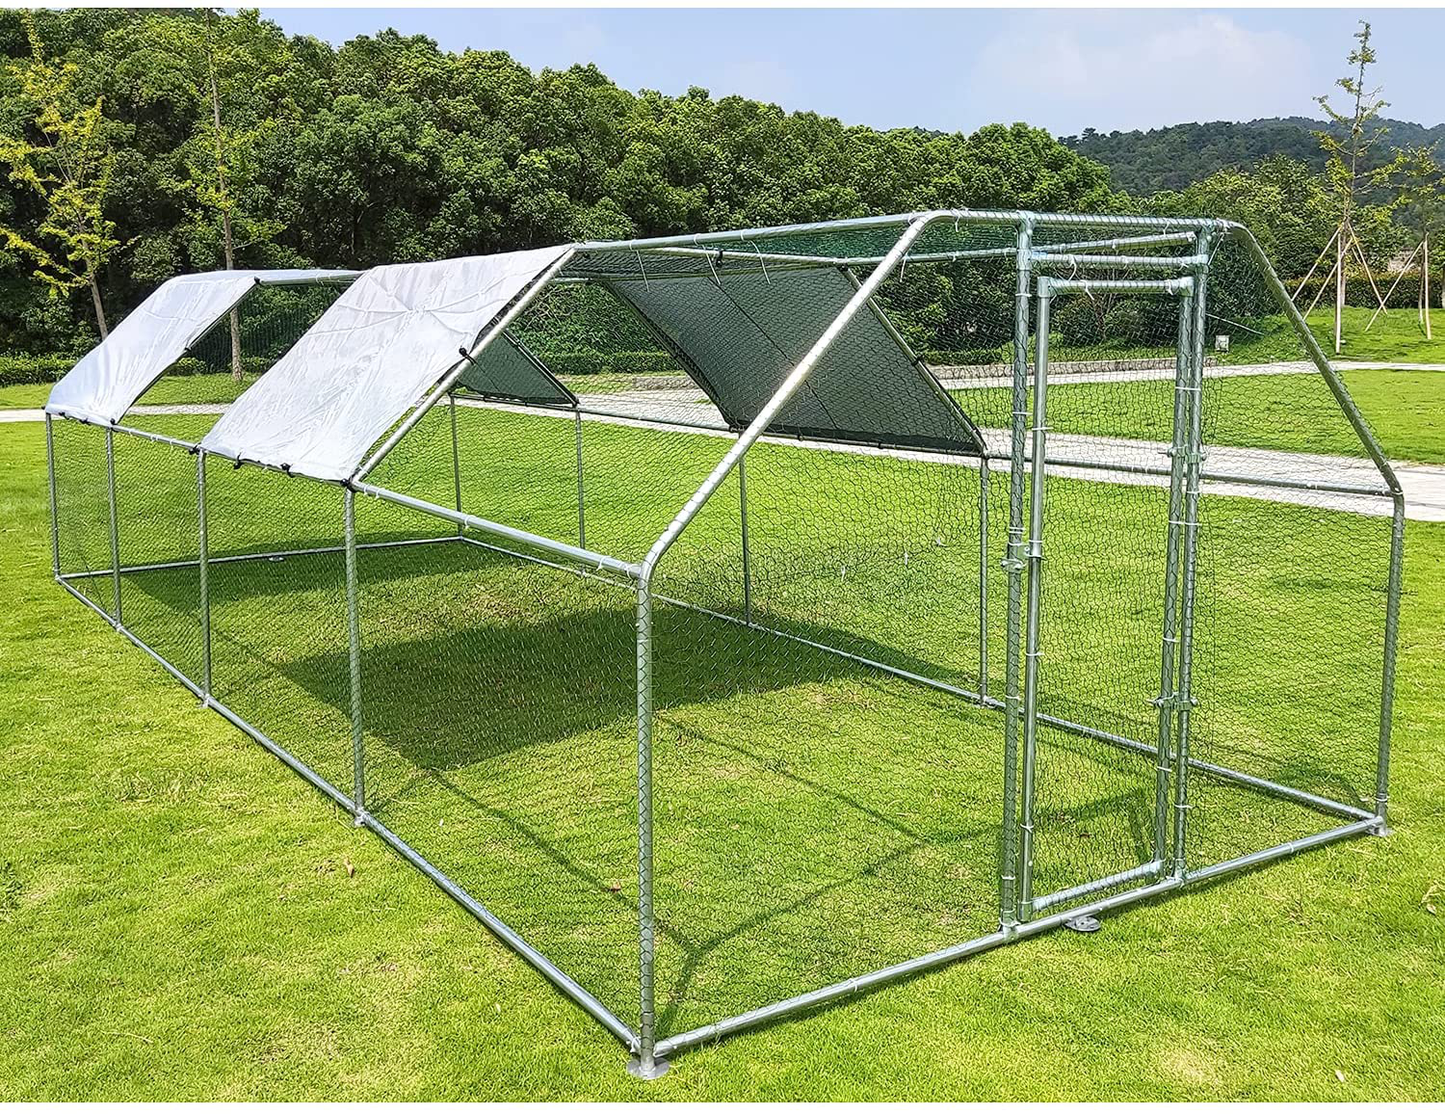 Hiwokk Large Metal Chicken Coop Walk-In Cage Chicken Run Duck House Chicken Pen Dog Kennel Flat Roofed Cage with Waterproof and Anti-Ultraviolet Cover for Outdoor Farm Use（9.2' L X 18.4' W X 6.4' H）